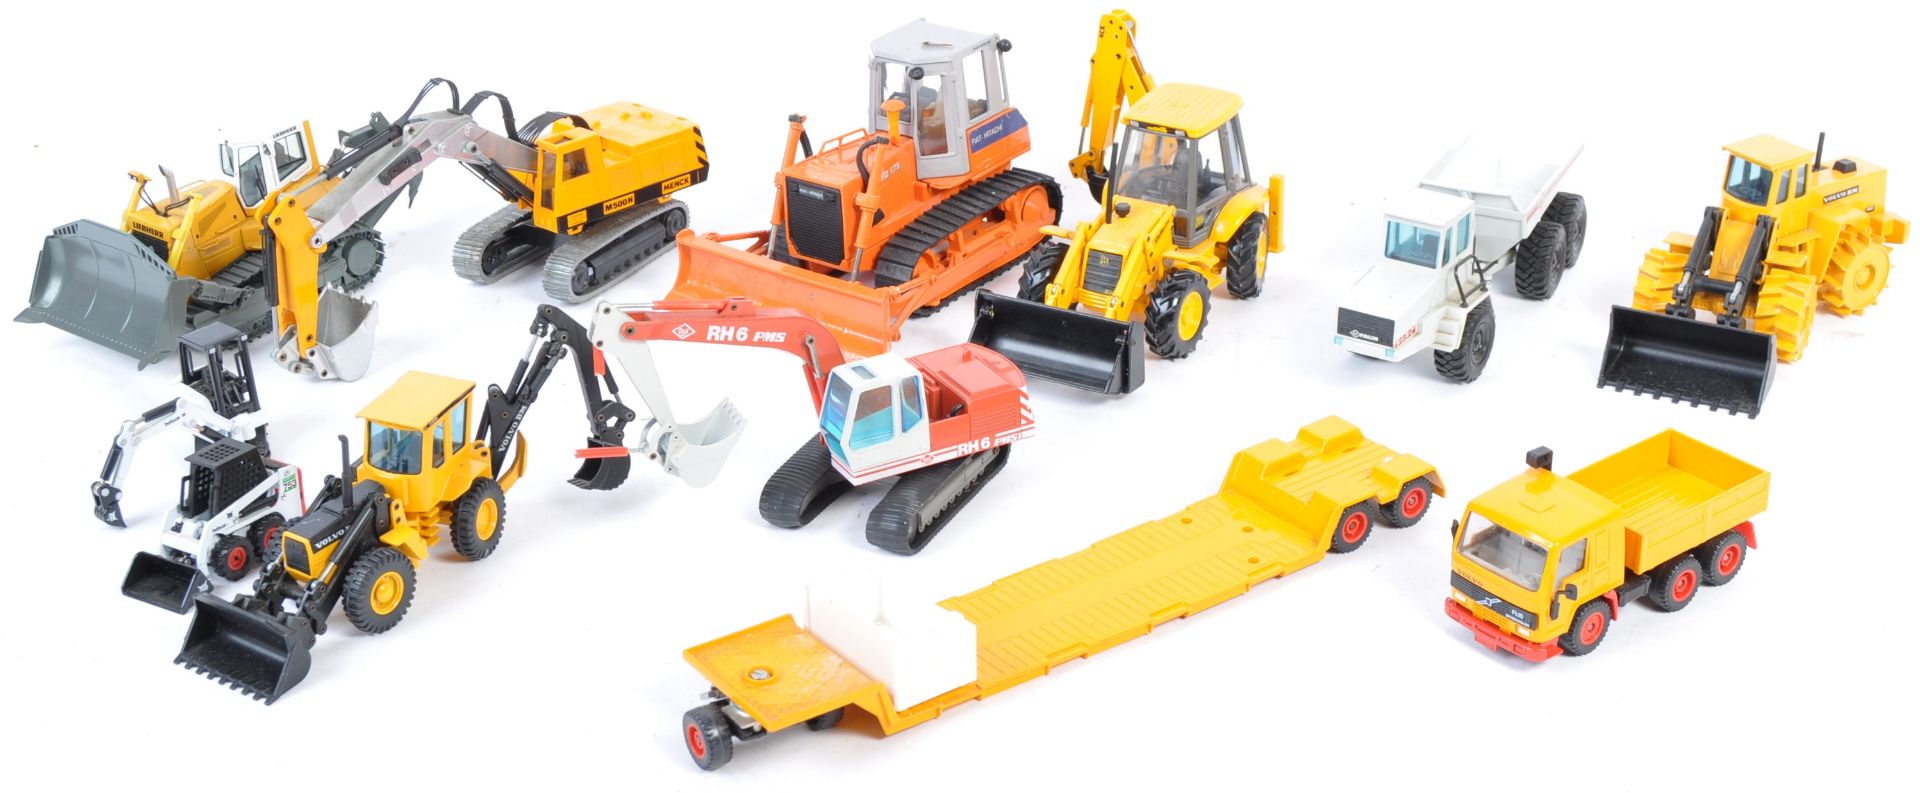 COLLECTION OF 1/50 NZG AND OTHER CONSTRUCTION DIECAST